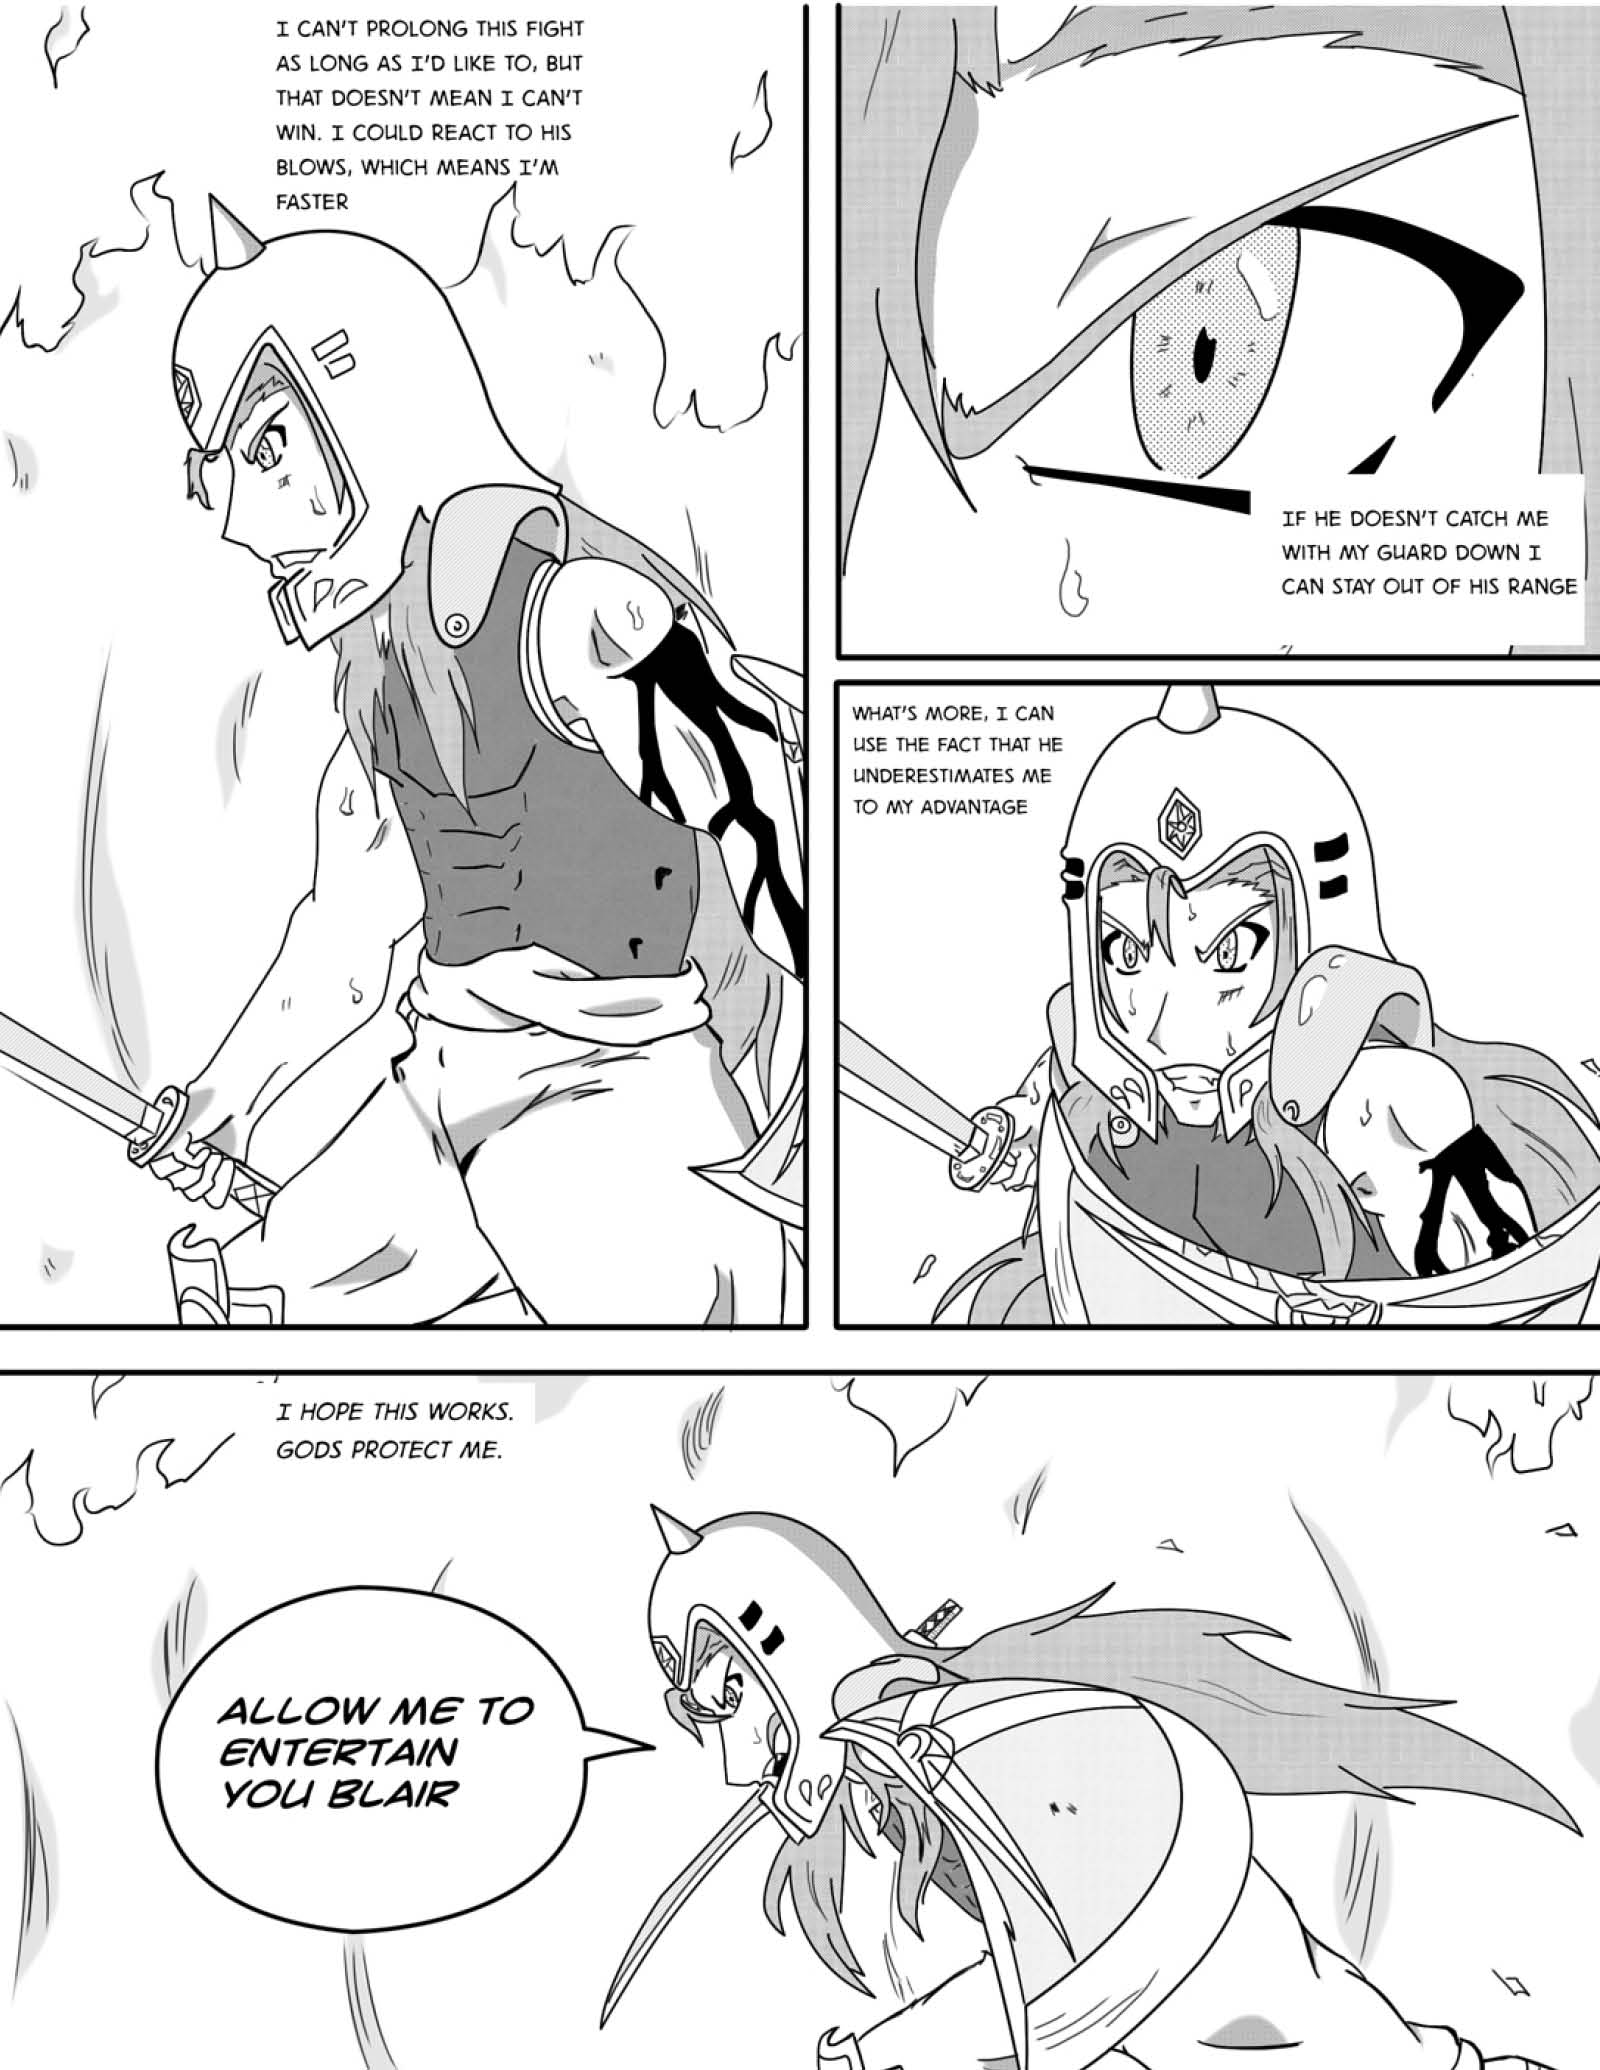 Series Dilan: the Chronicles of Covak - Chapter 2 - Page 18 - Language ENG